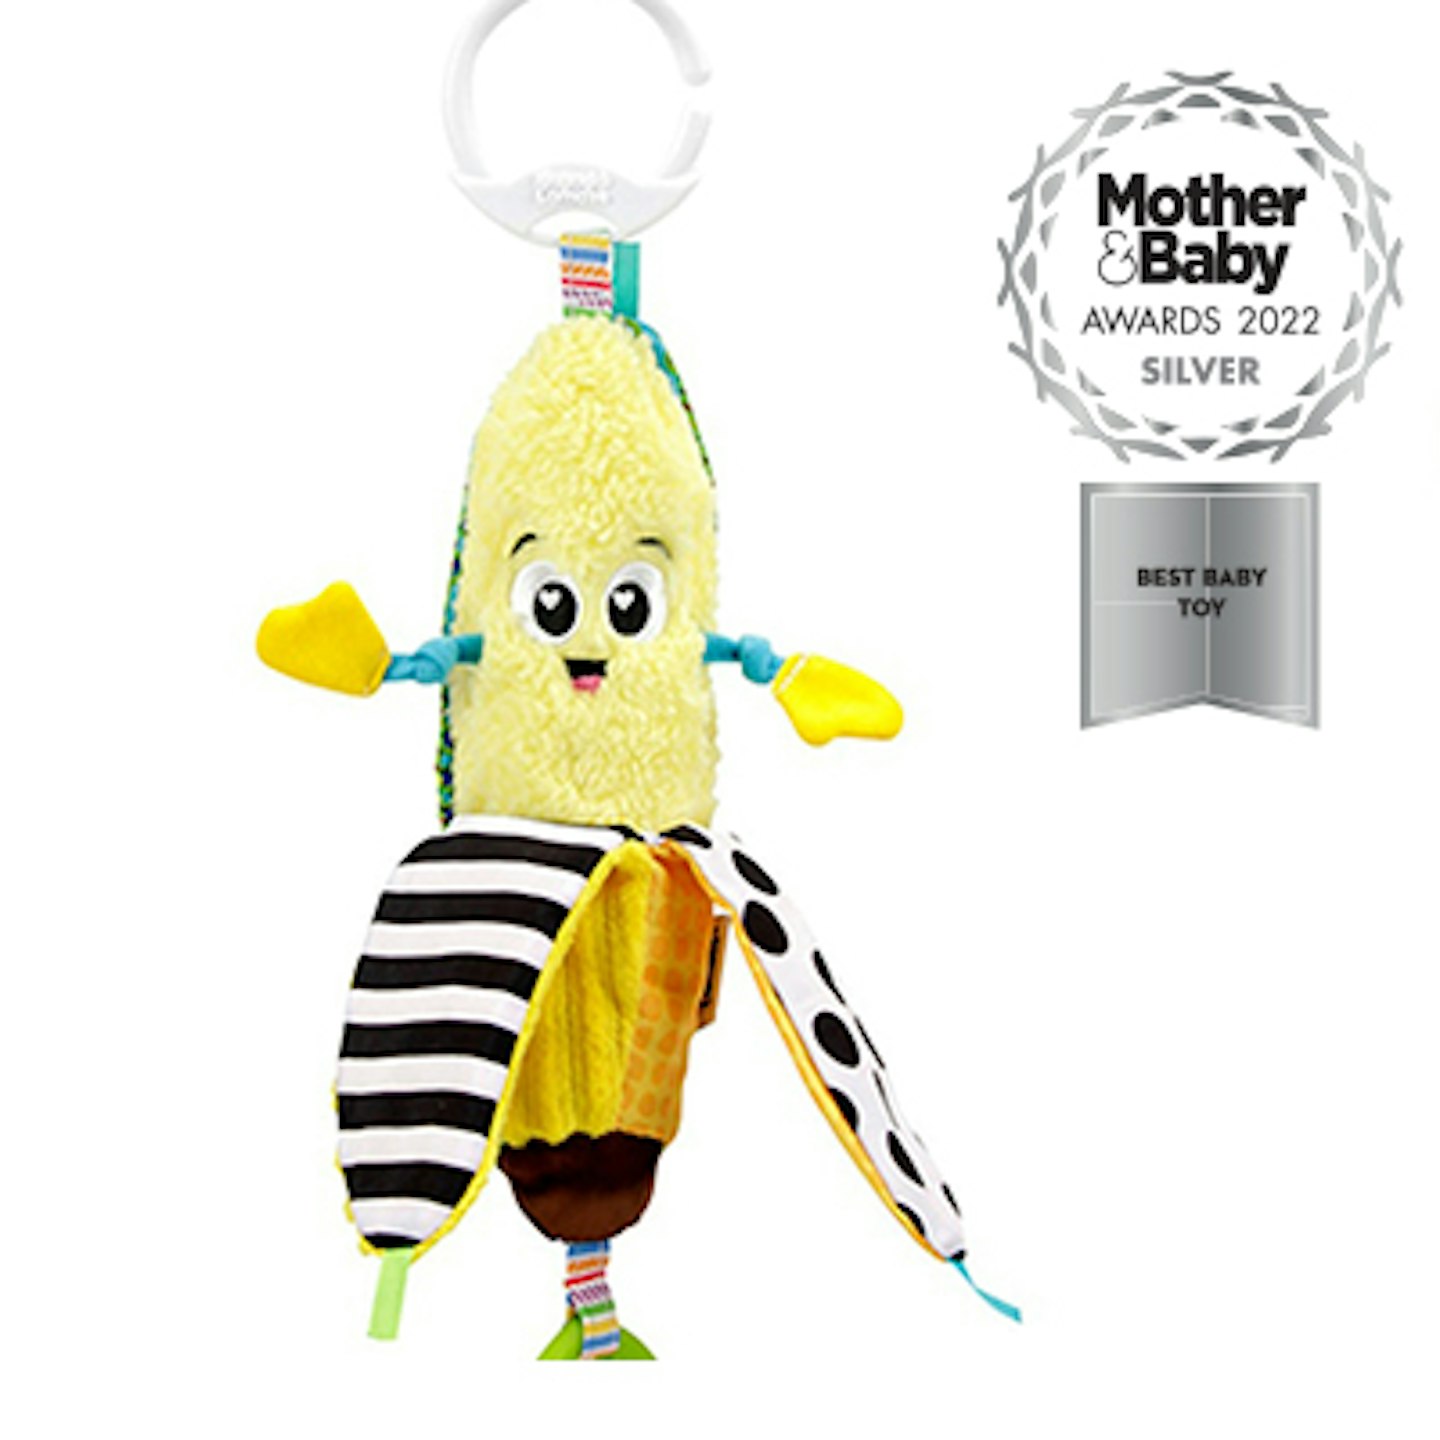 SQUARE-best-baby-toy-silver